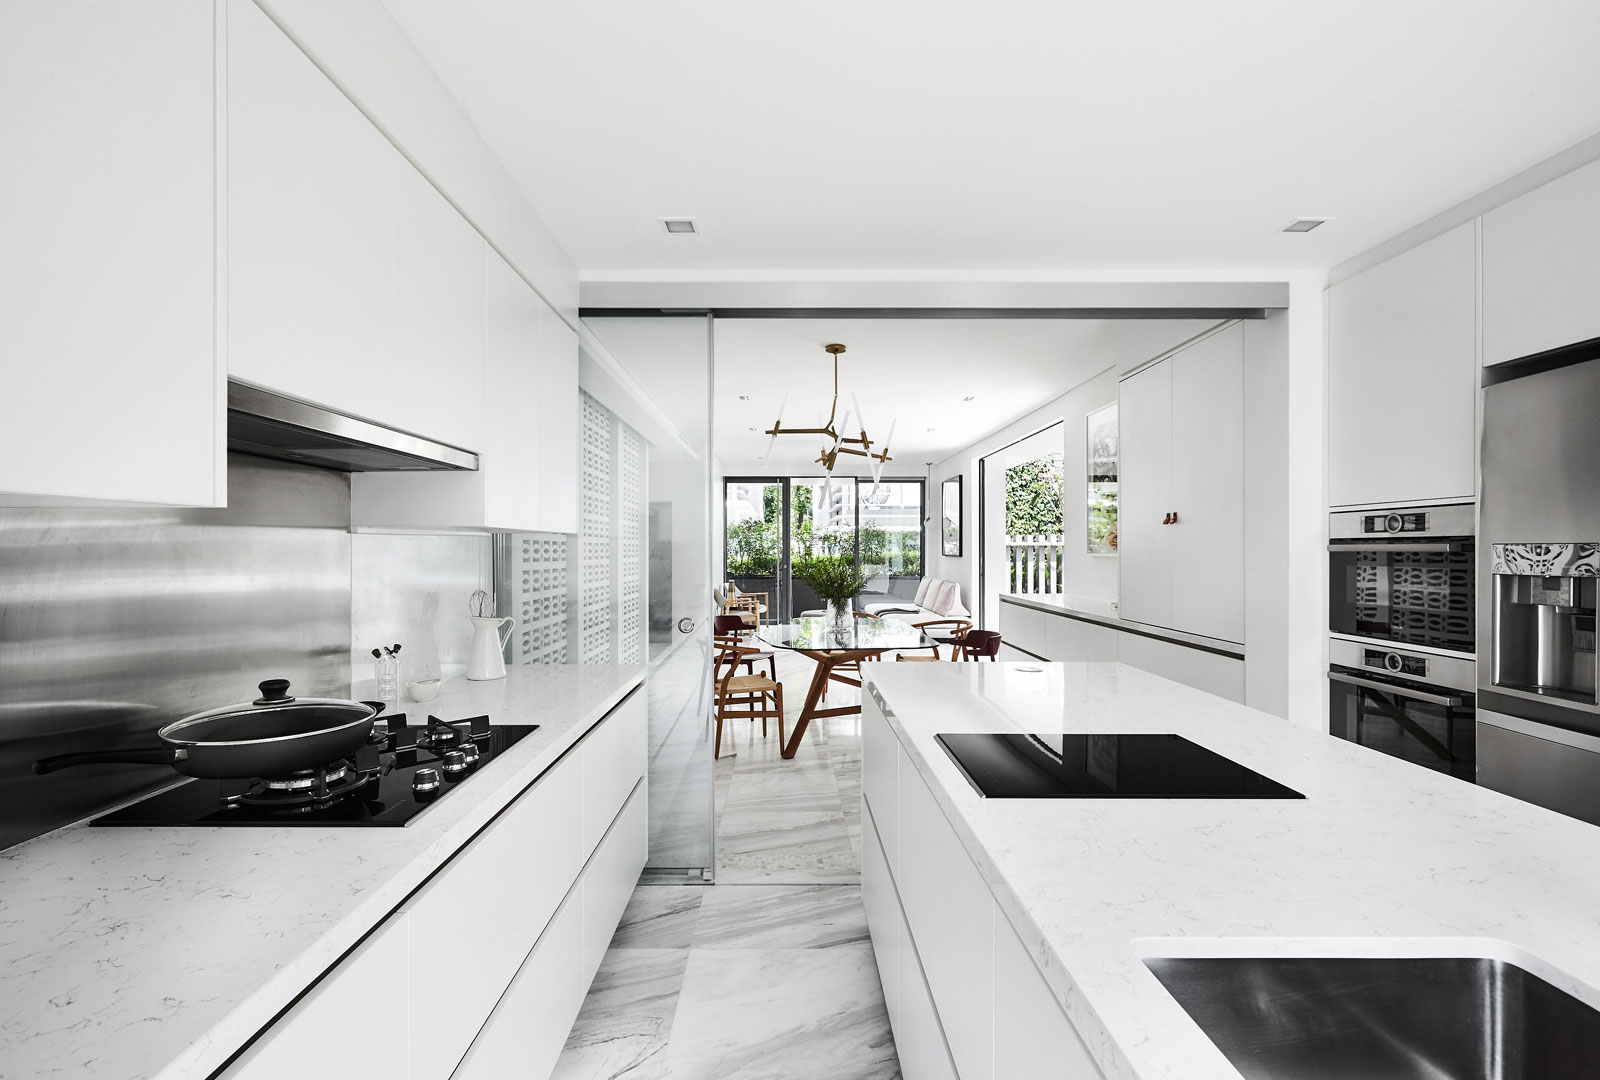 A white kitchen with marble counter tops and stainless steel appliances.